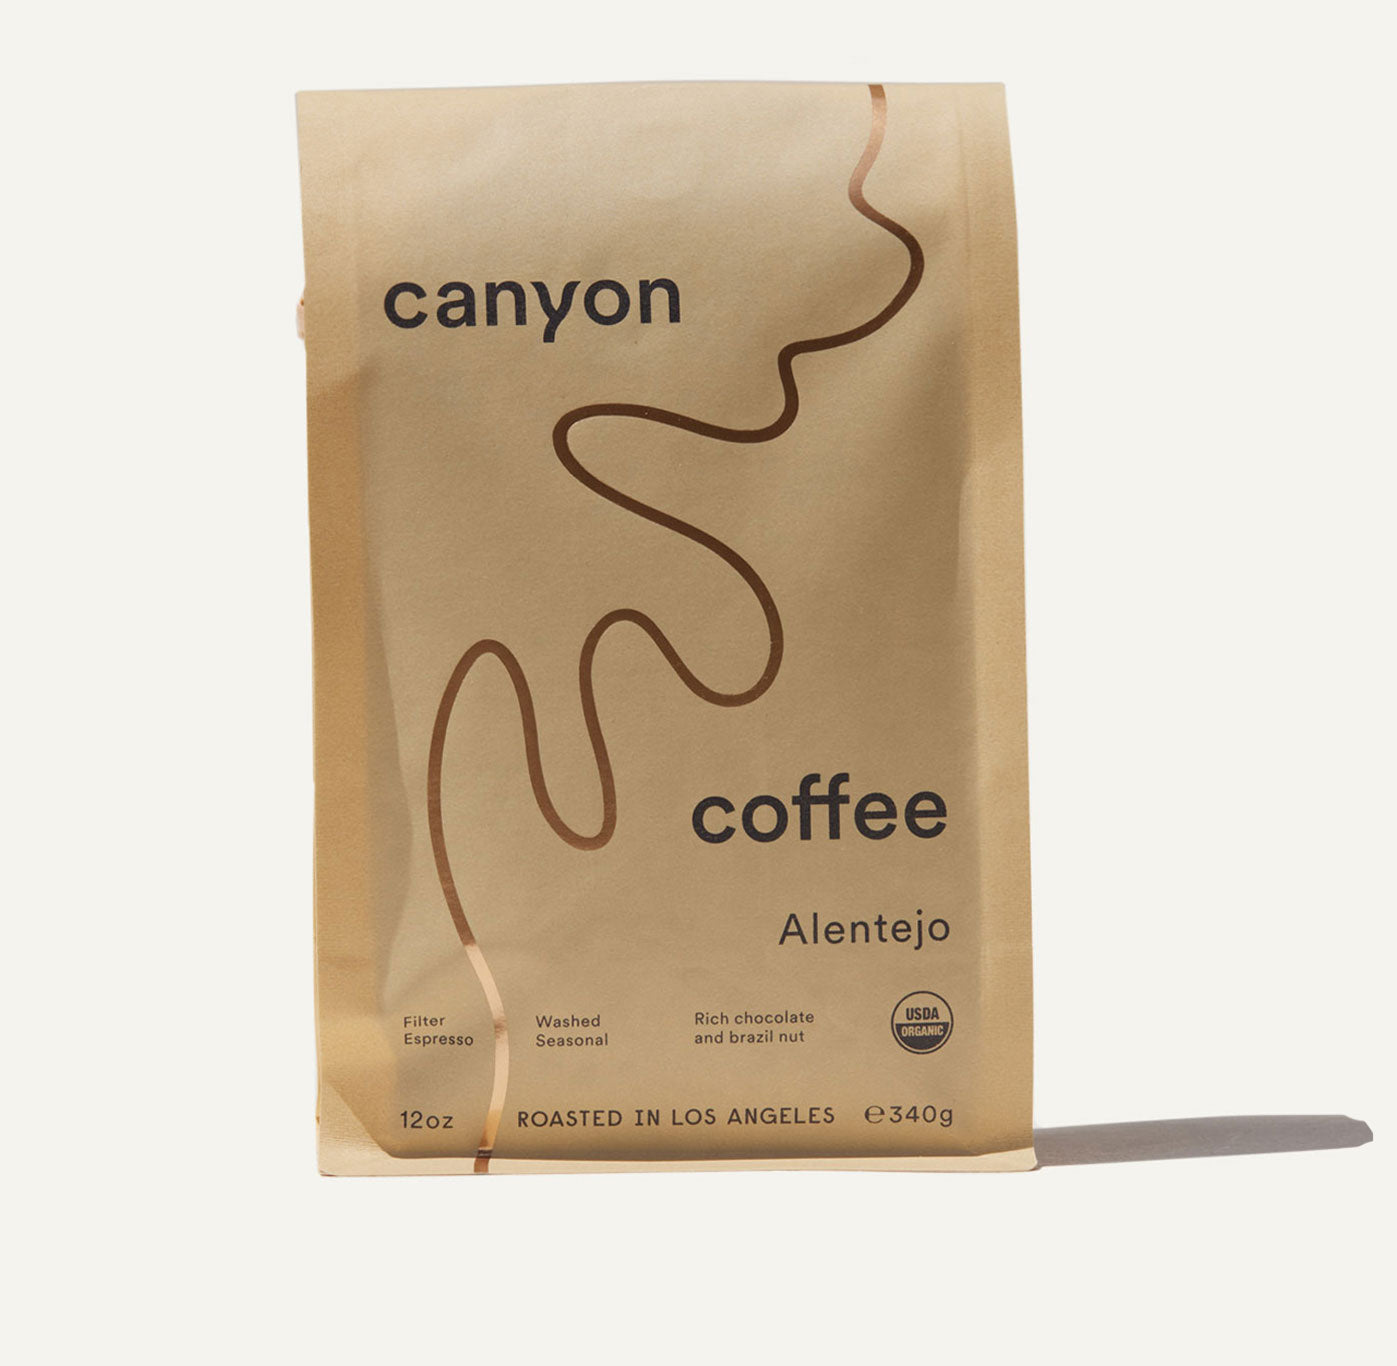 A yellow bag of Canyon Coffee with a gold foil river